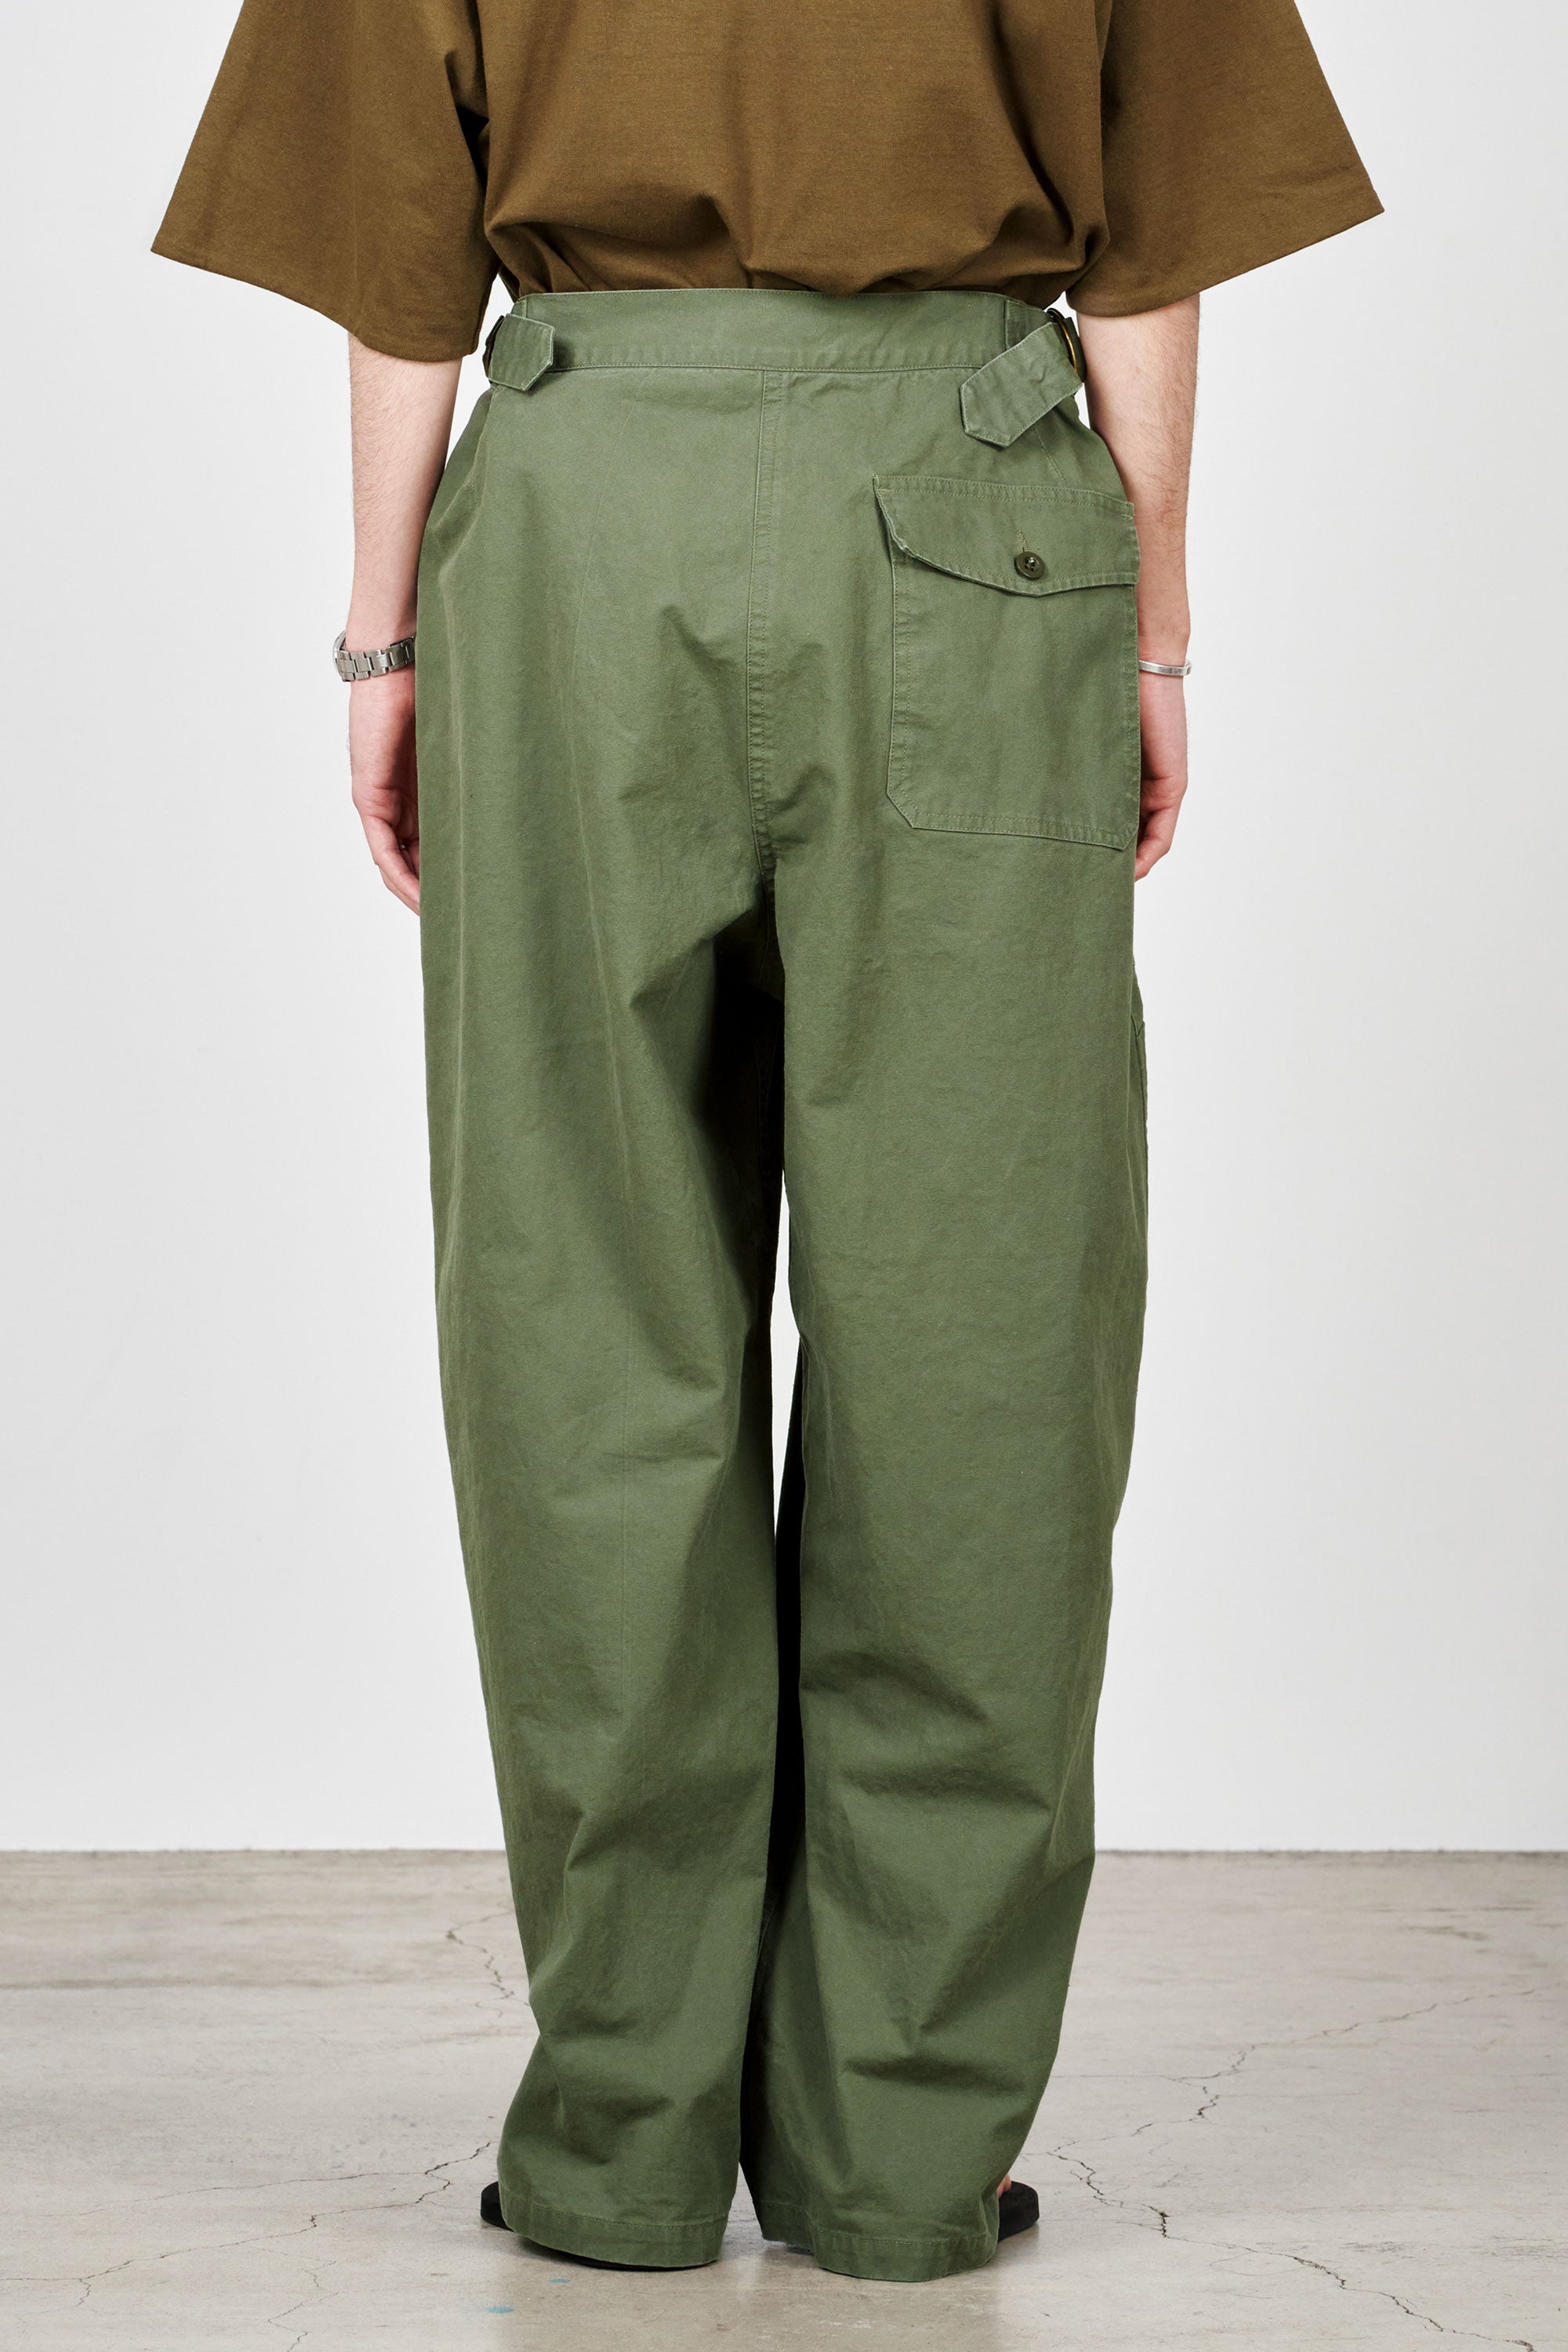 ORGANIC COTTON CANVAS FRENCH AVIATOR PANTS, Olive